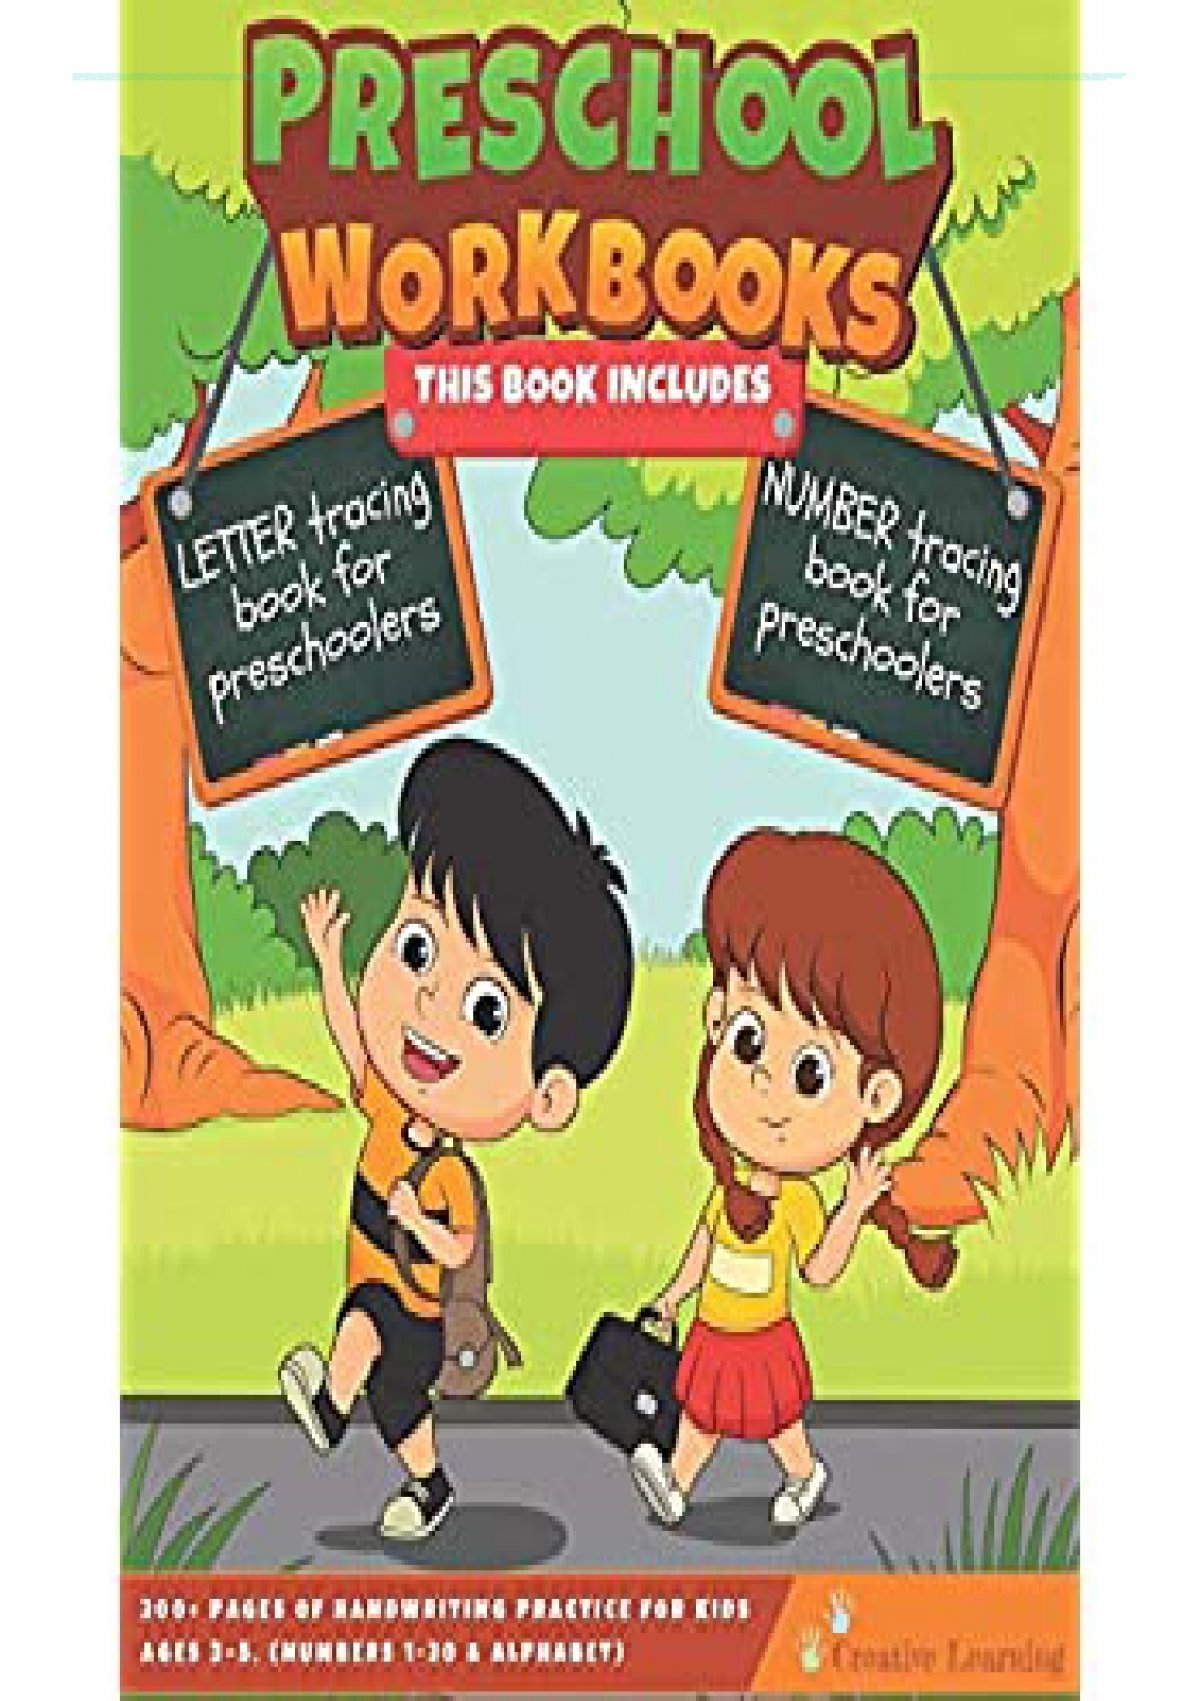 pdf-preschool-workbooks-this-book-includes-letter-tracing-book-for-preschoolers-number